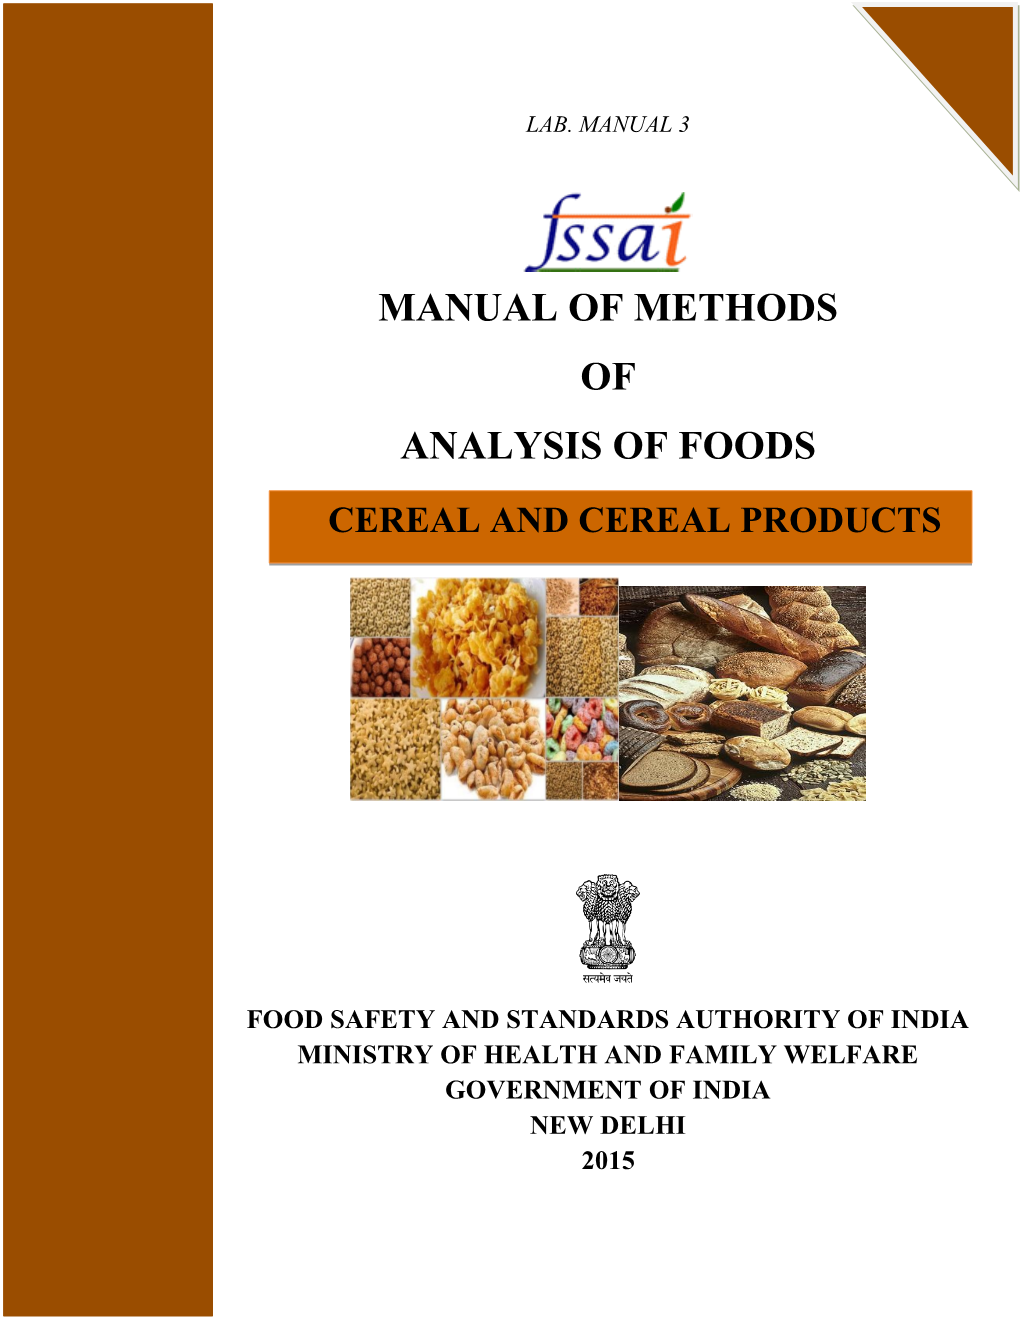 7. Manual on Testing of Cereal and Cereal Products